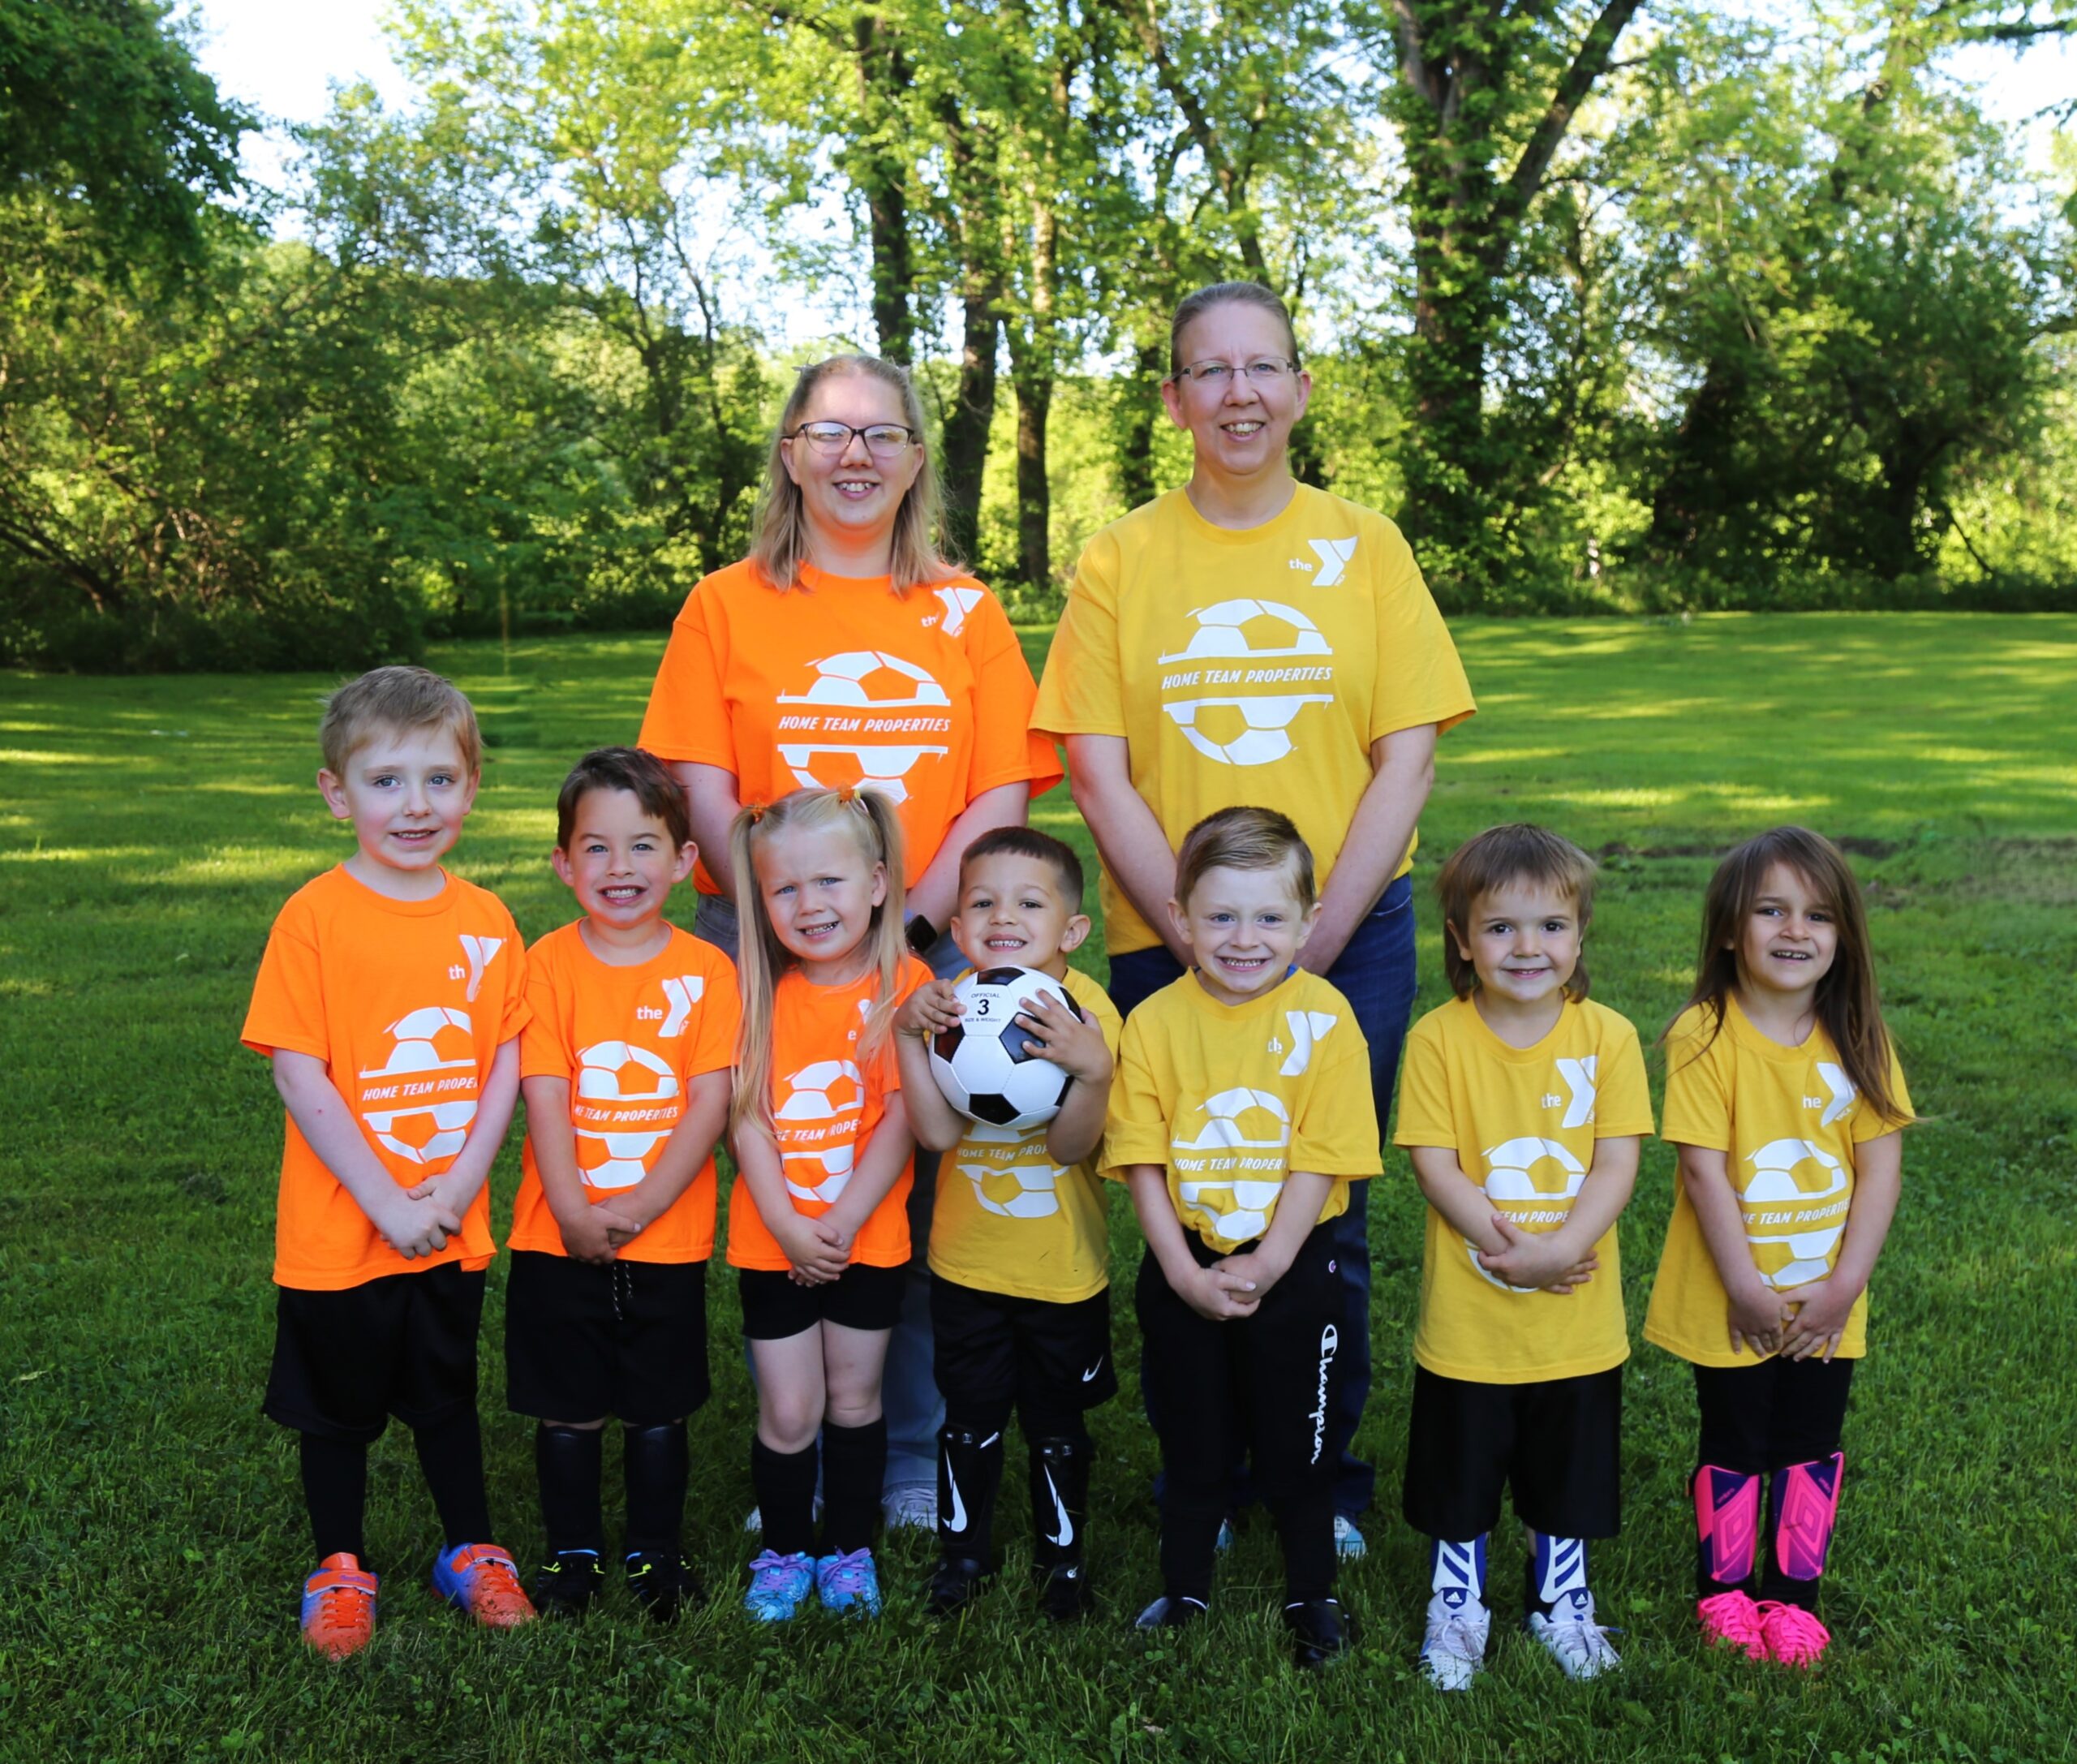 Home Team Properties Youth Soccer Team